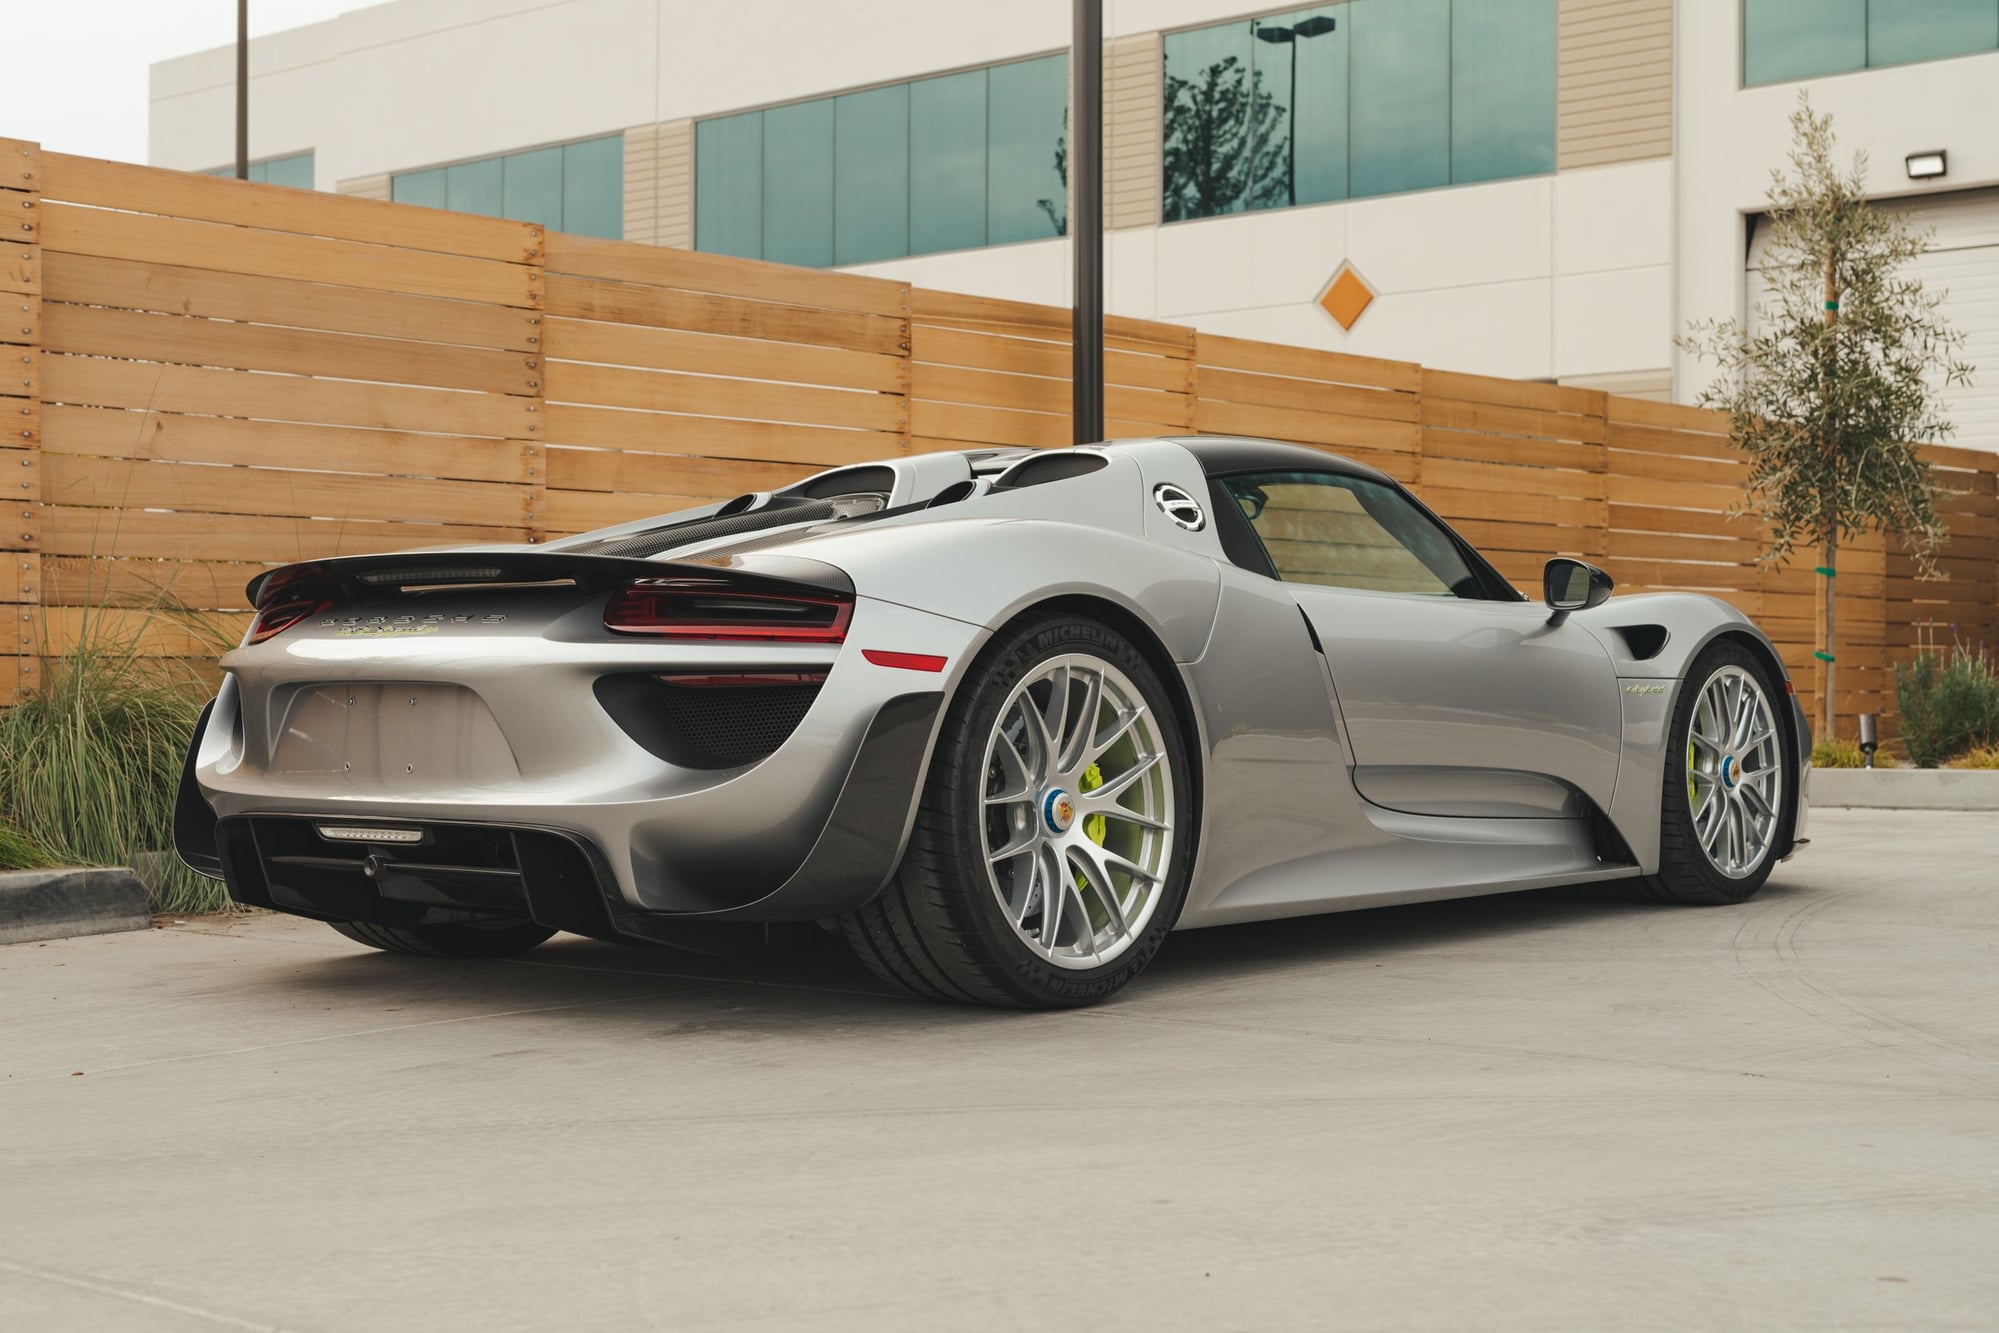 2015 Porsche 918 Spyder - Weissach Package 918 in GT Silver with Garnet Red Interior. 160 Miles from New. - Used - VIN WP0CA2A16FS800067 - 160 Miles - 8 cyl - AWD - Automatic - Convertible - Silver - San Carlos, CA 94070, United States